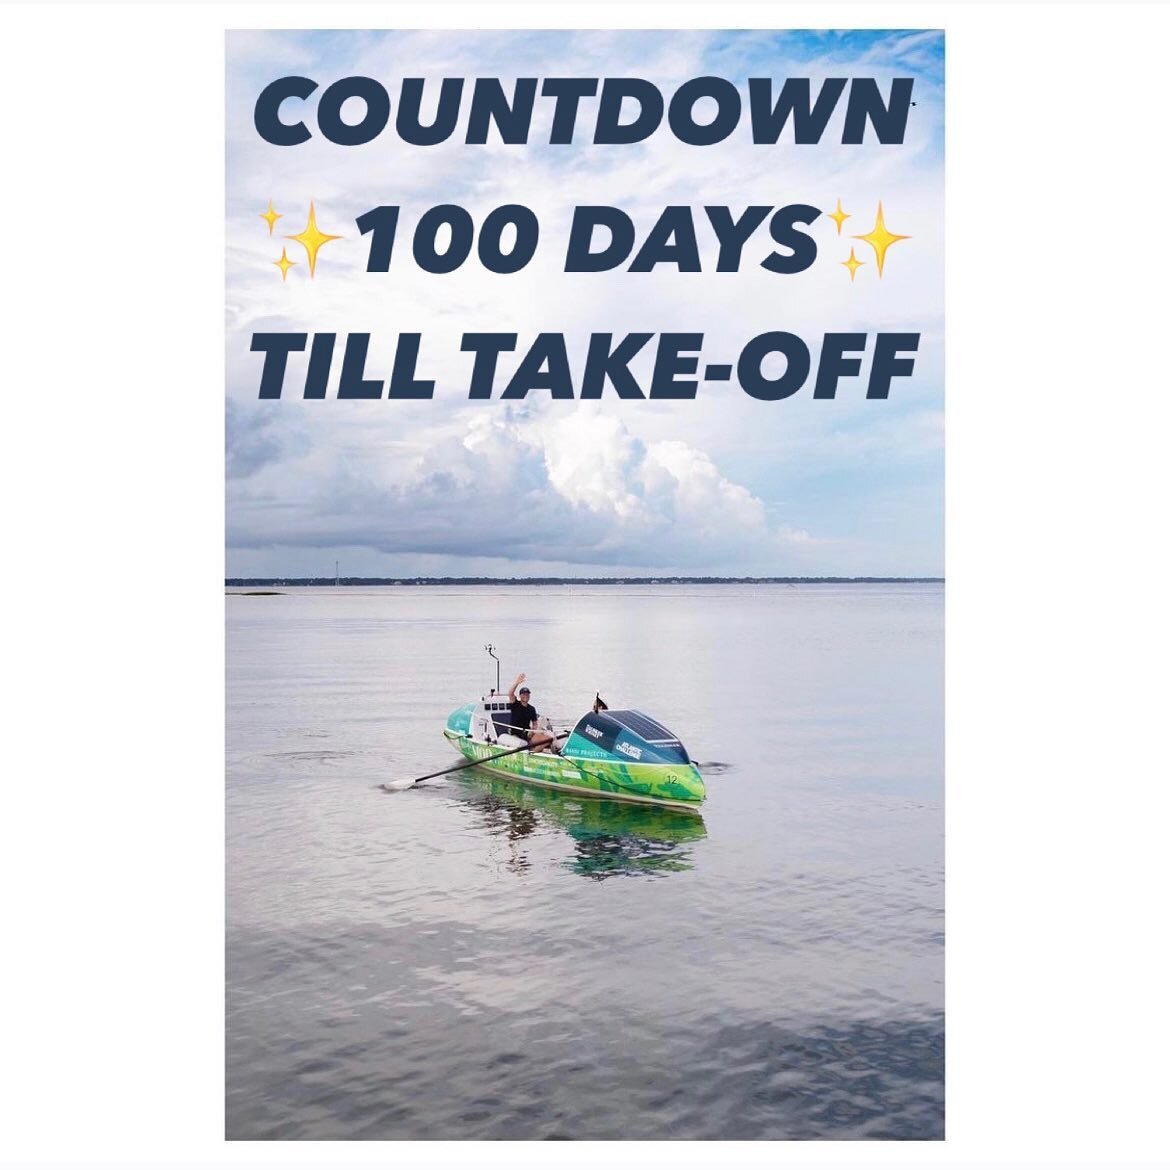 It is T-minus 100 days until our Dreamboats take-off from the Canary Islands 🇮🇨 and row over 3,000 nautical miles across the Atlantic Ocean, to Antigua in the Caribbean 🌊 

They will be unassisted and 35 other boats in the race. Learn more &amp; f